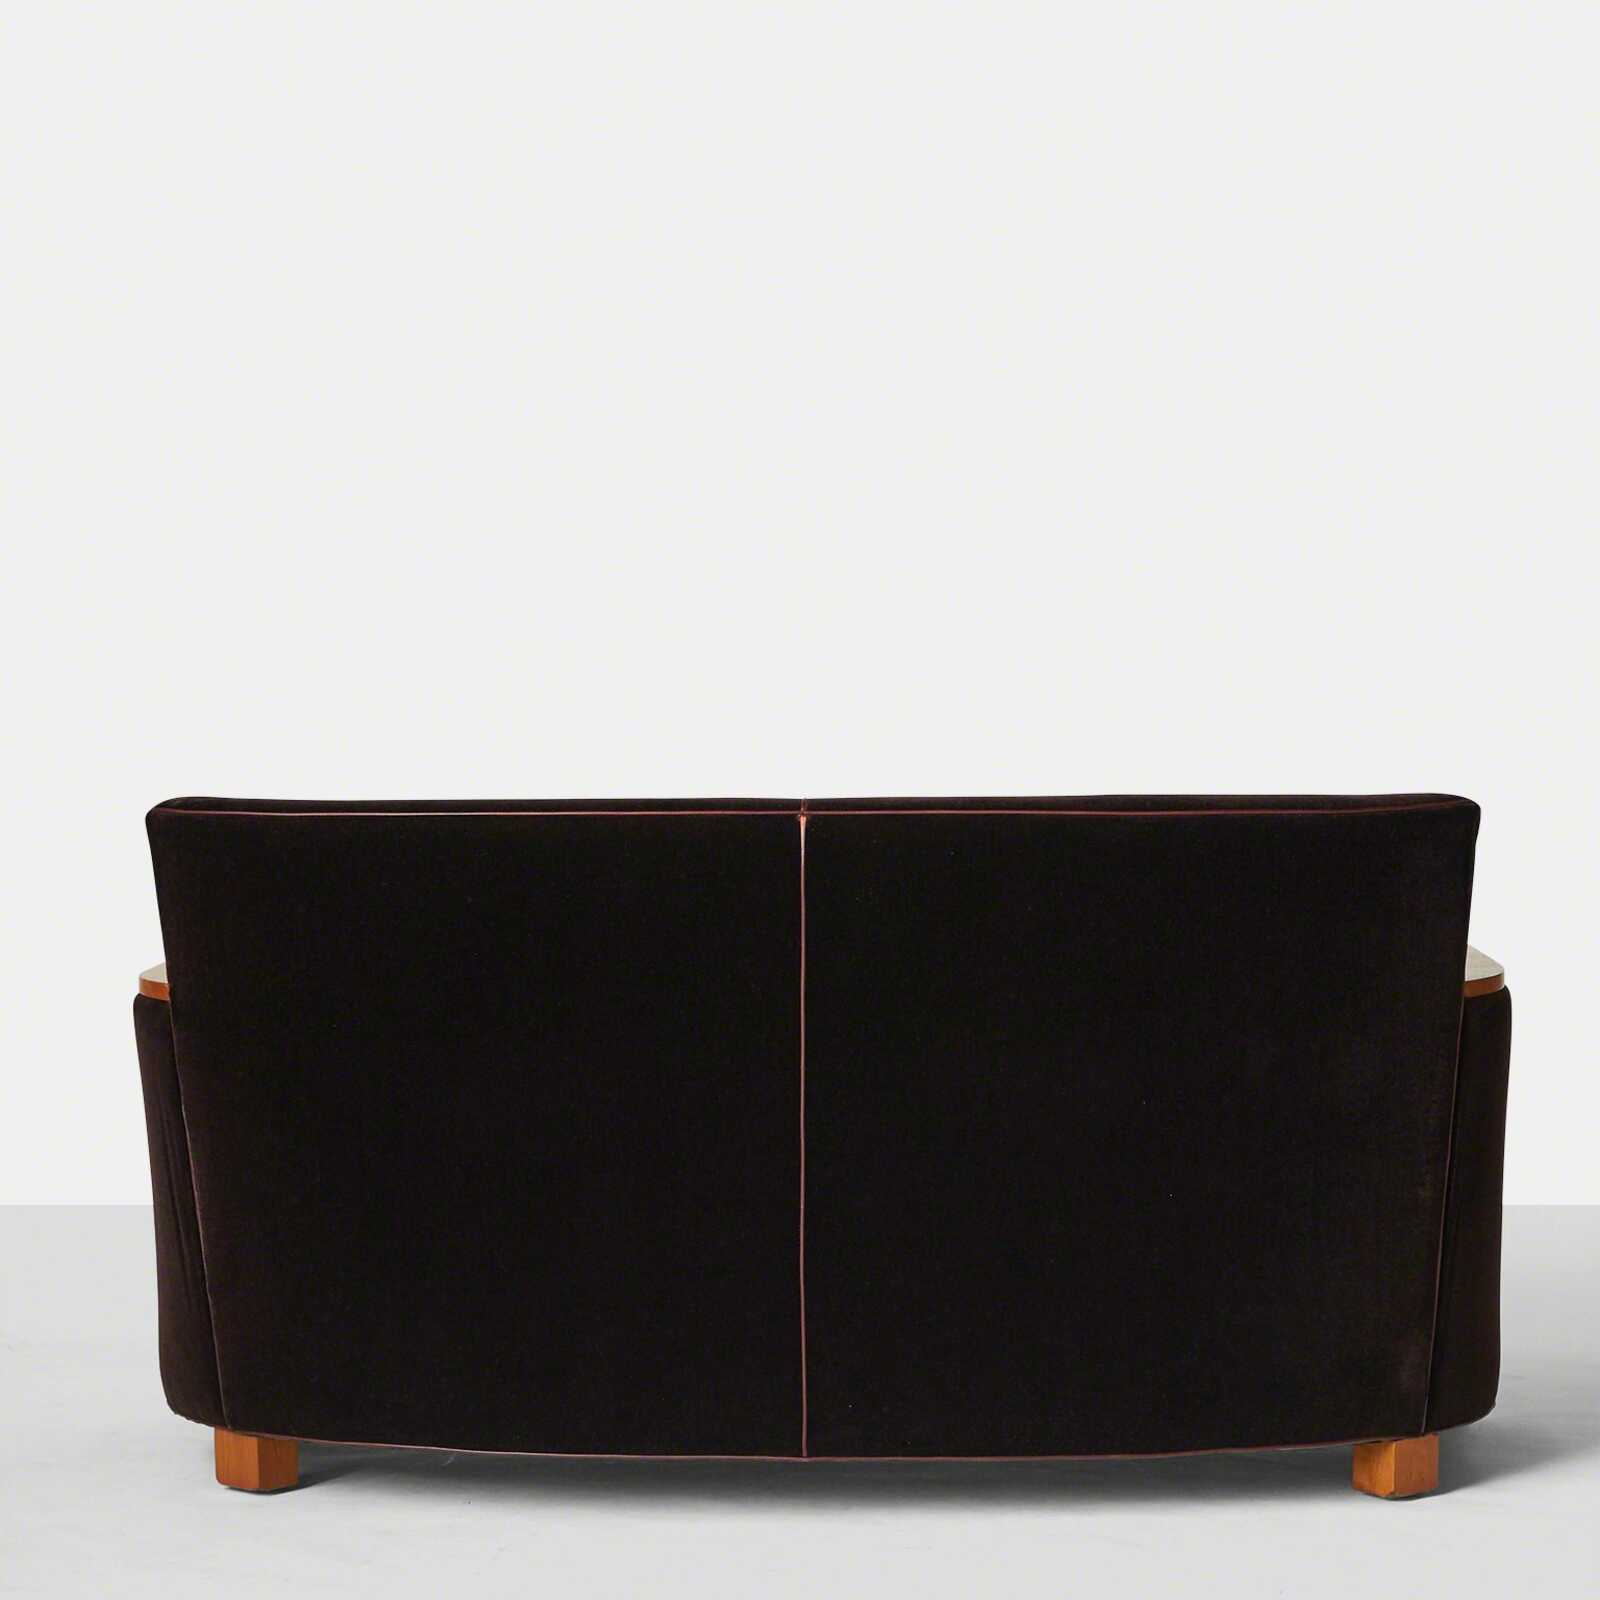 Jacques Adnet | Jacques Adnet – Sofa (1940-1949) | Available for Sale ...